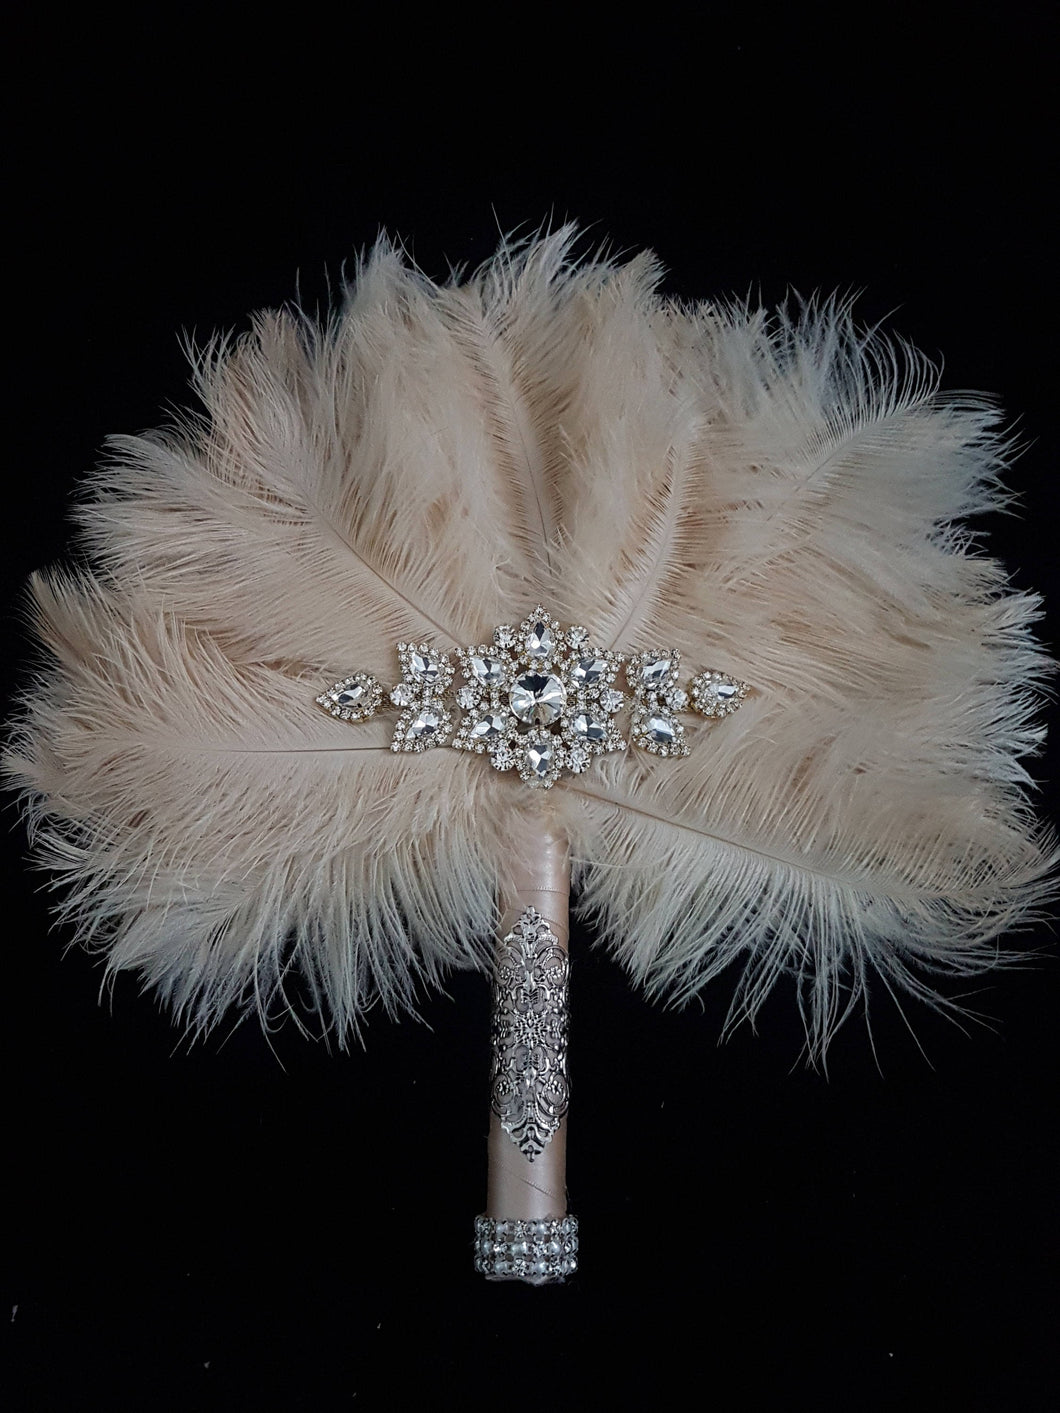 Bridal Feather Fan bouquet, Great Gatsby wedding style -ANY COLOUR by Crystal wedding uk